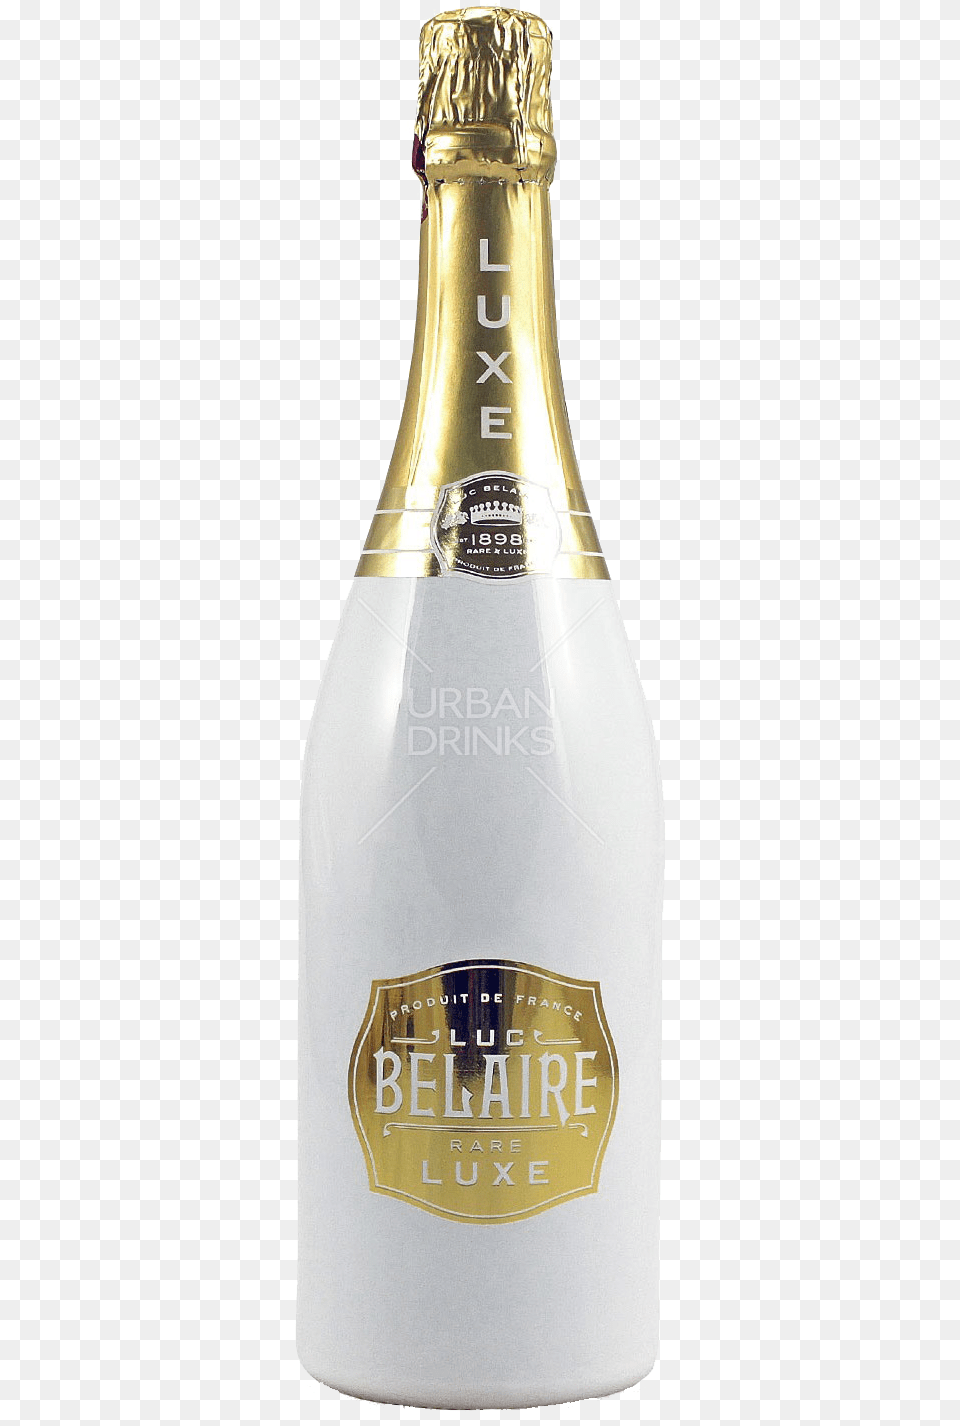 Luc Belaire Brut Luxe 75cl Belaire Rose White Bottle, Alcohol, Beer, Beverage, Liquor Free Transparent Png